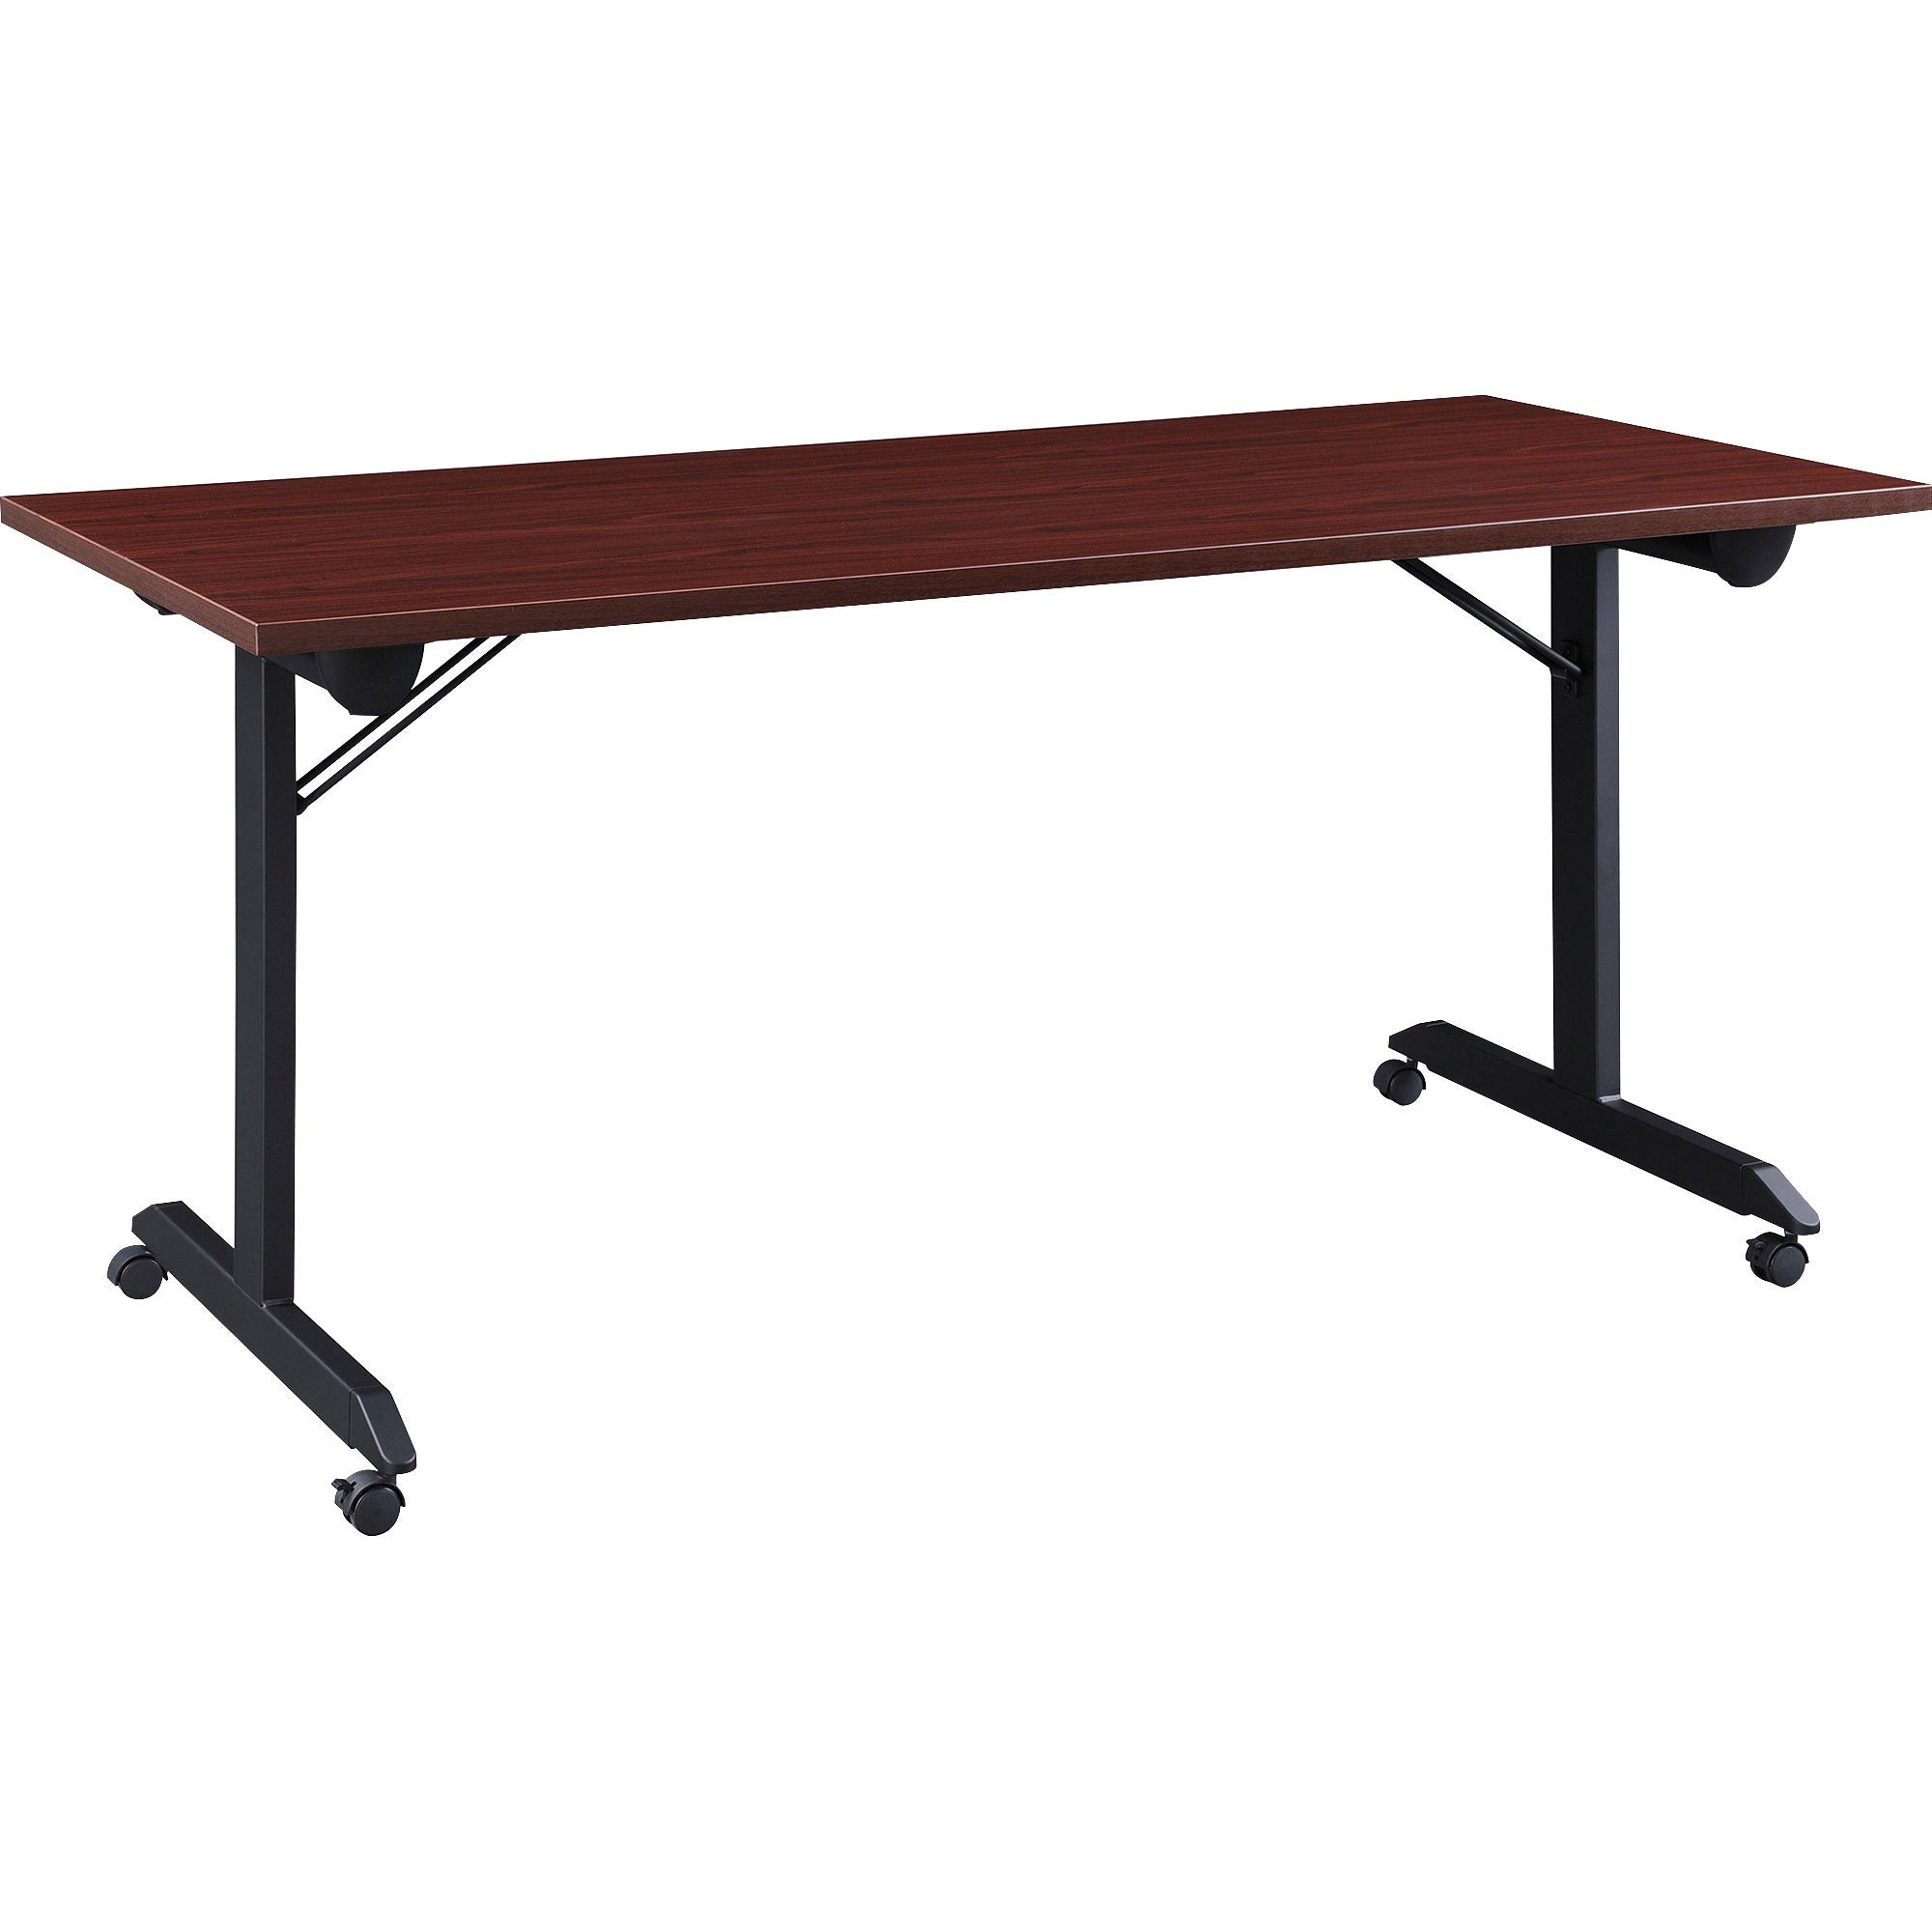 lorell-mobile-folding-training-table-for-table-toprectangle-top-powder-coated-base-200-lb-capacity-x-63-table-top-width-2950-height-x-63-width-x-24-depth-assembly-required-mahogany-1-each_llr60735 - 1